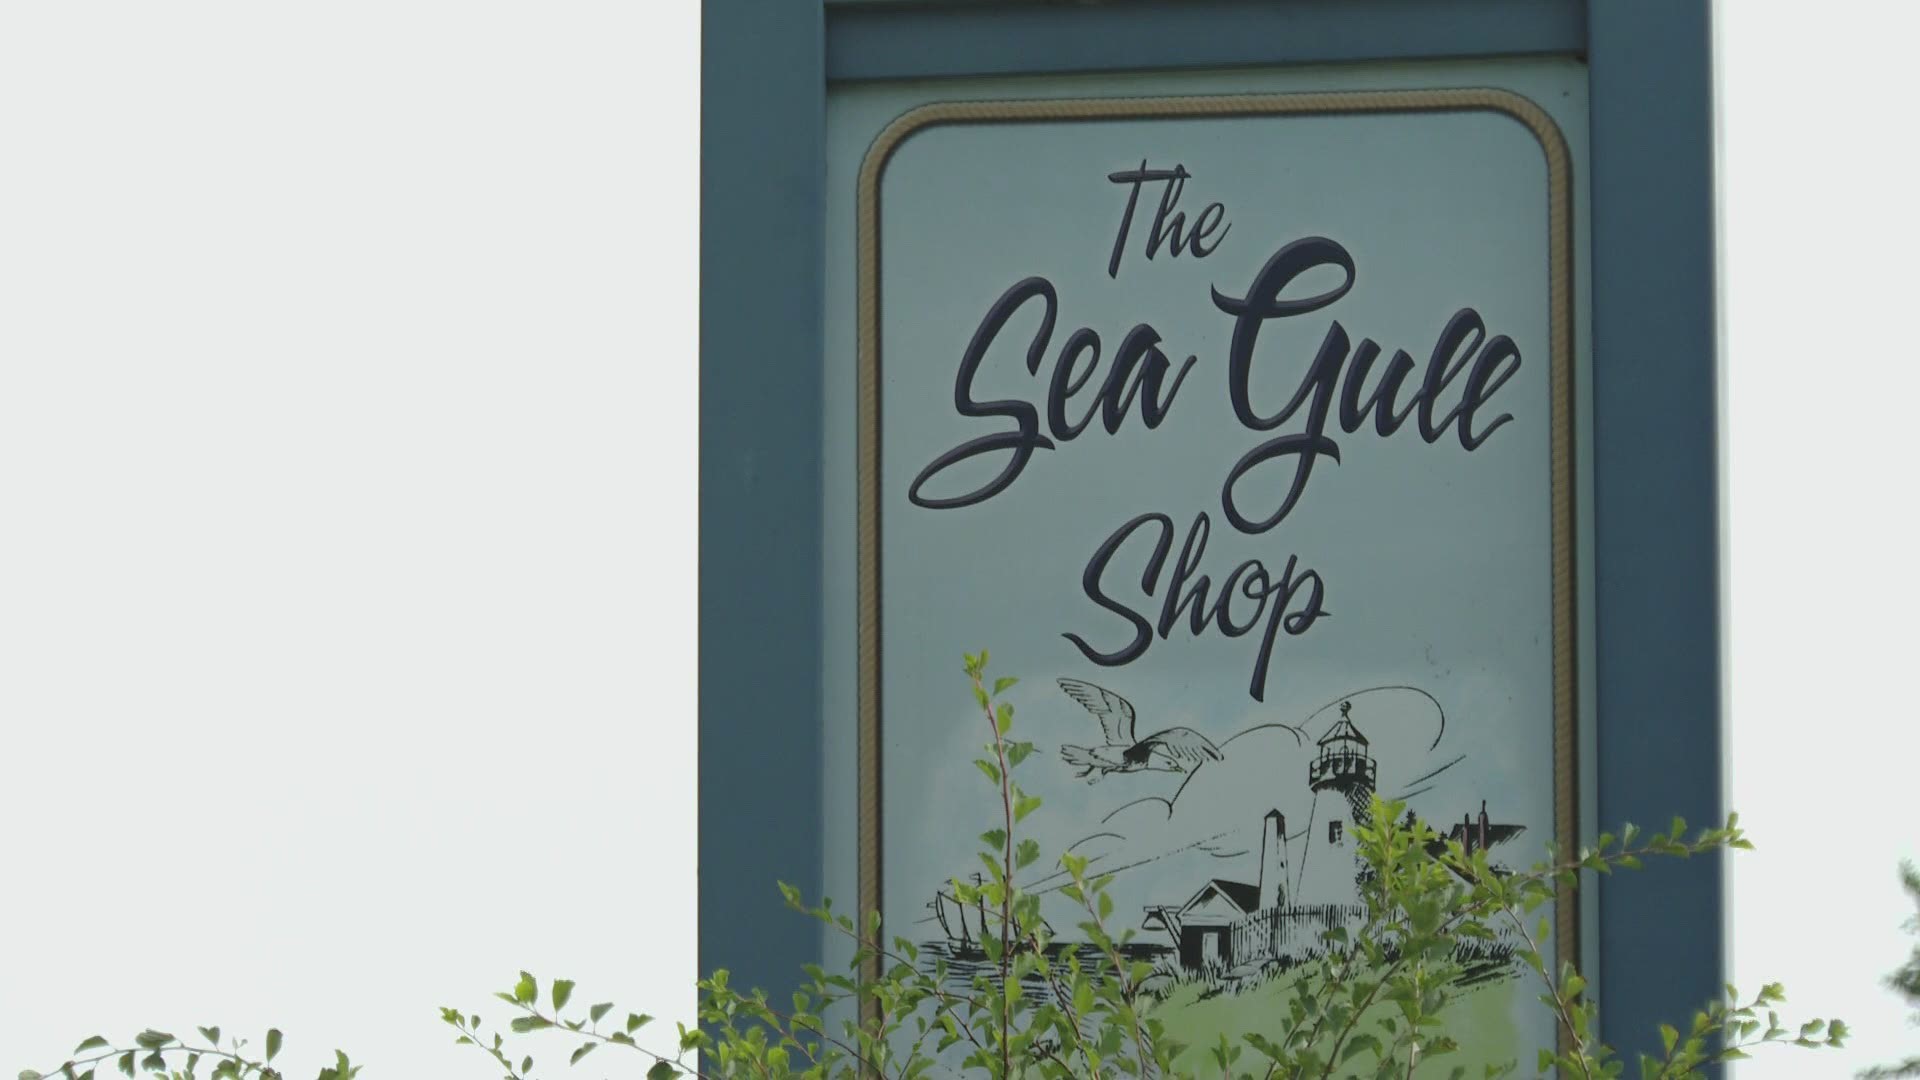 The Seagull Shop recalls its legacy after fire